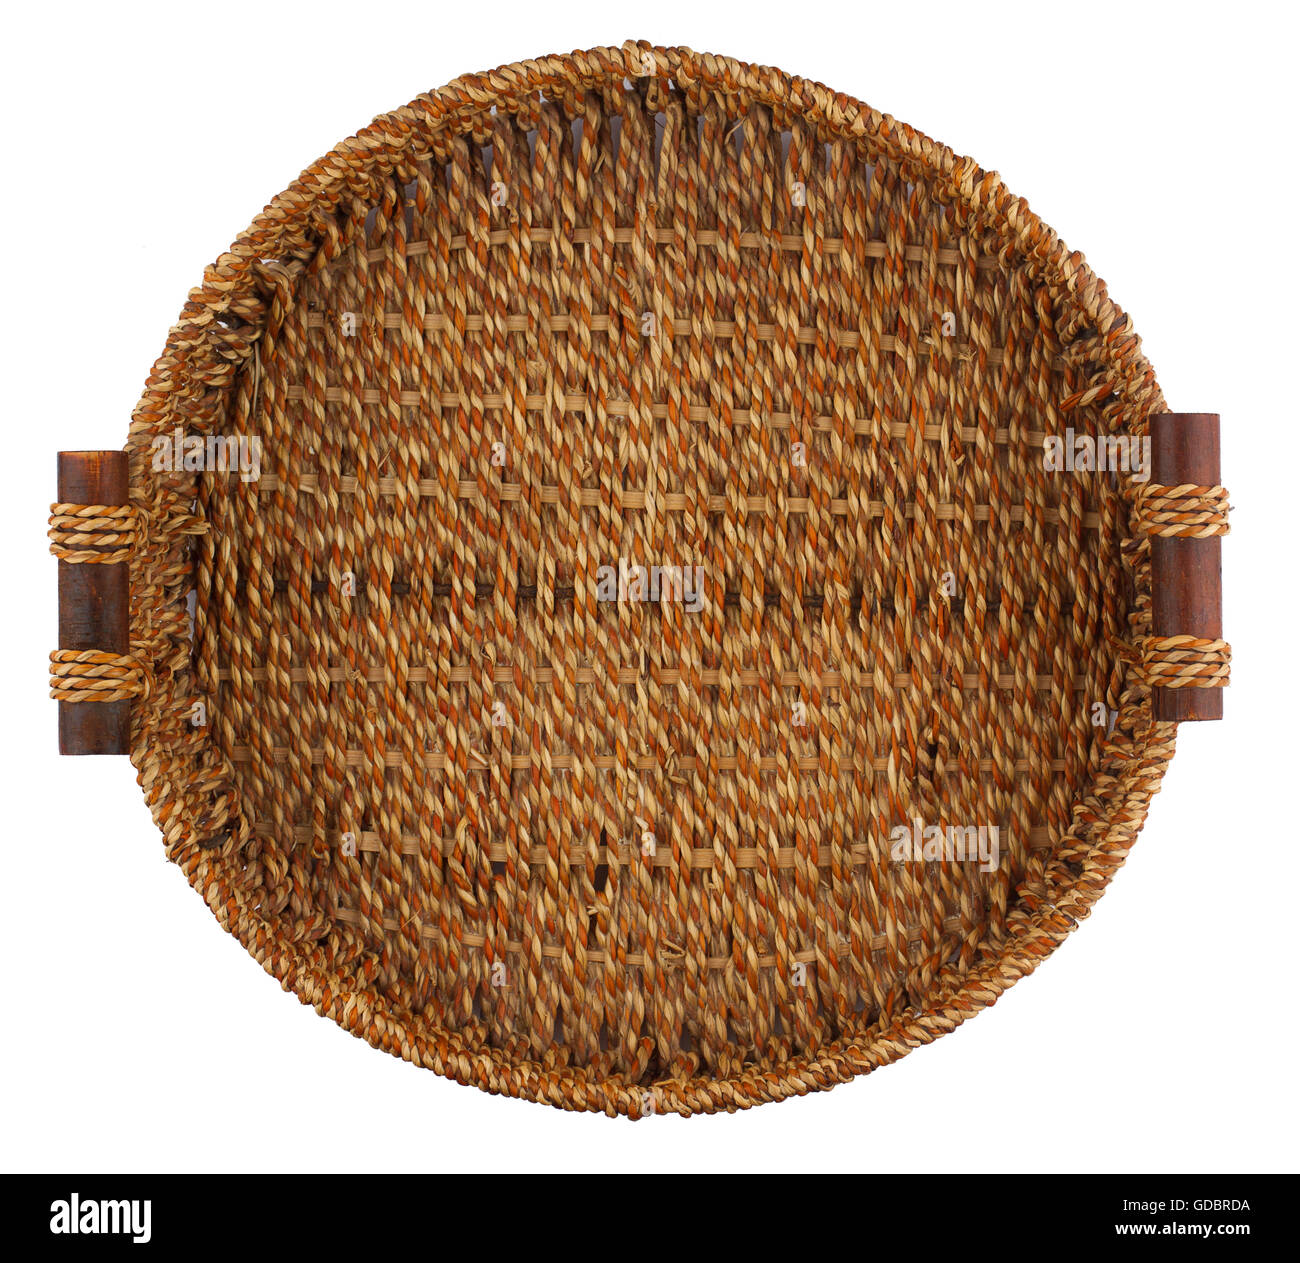 Top view of a large round empty woven wood basket with handles isolated on white background Stock Photo